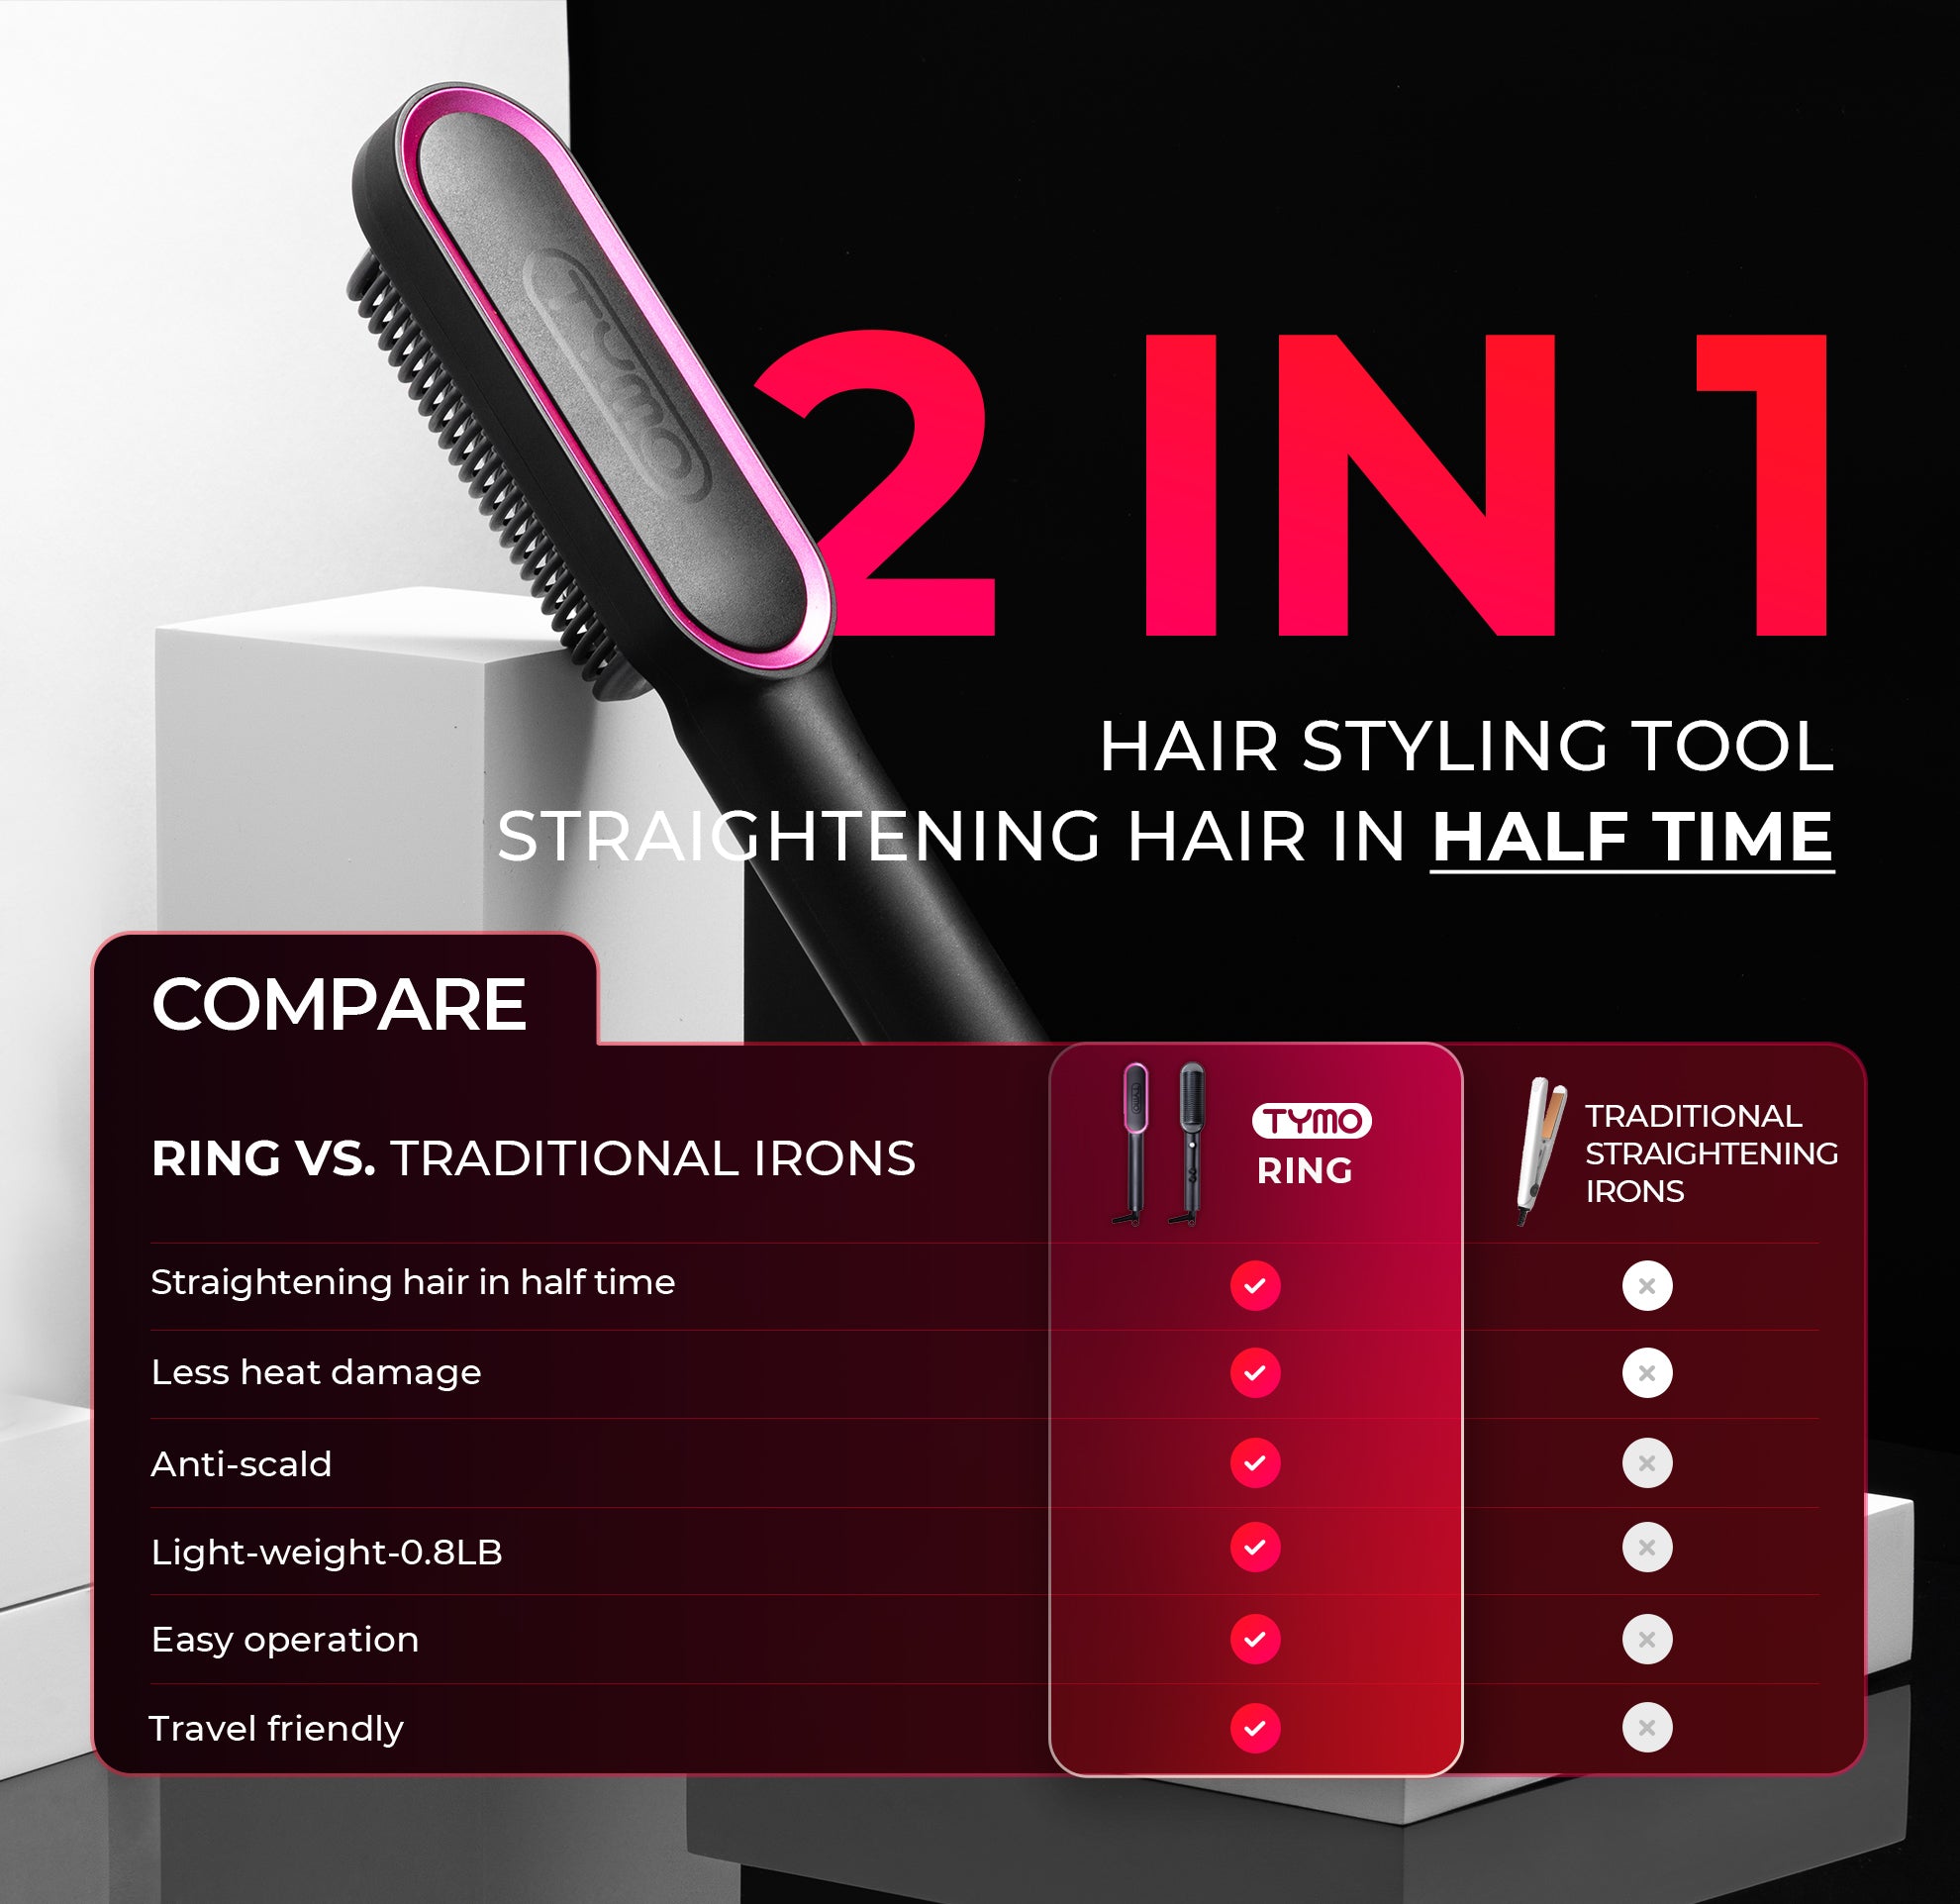 2 IN 1 HAIR STYLING TOOL